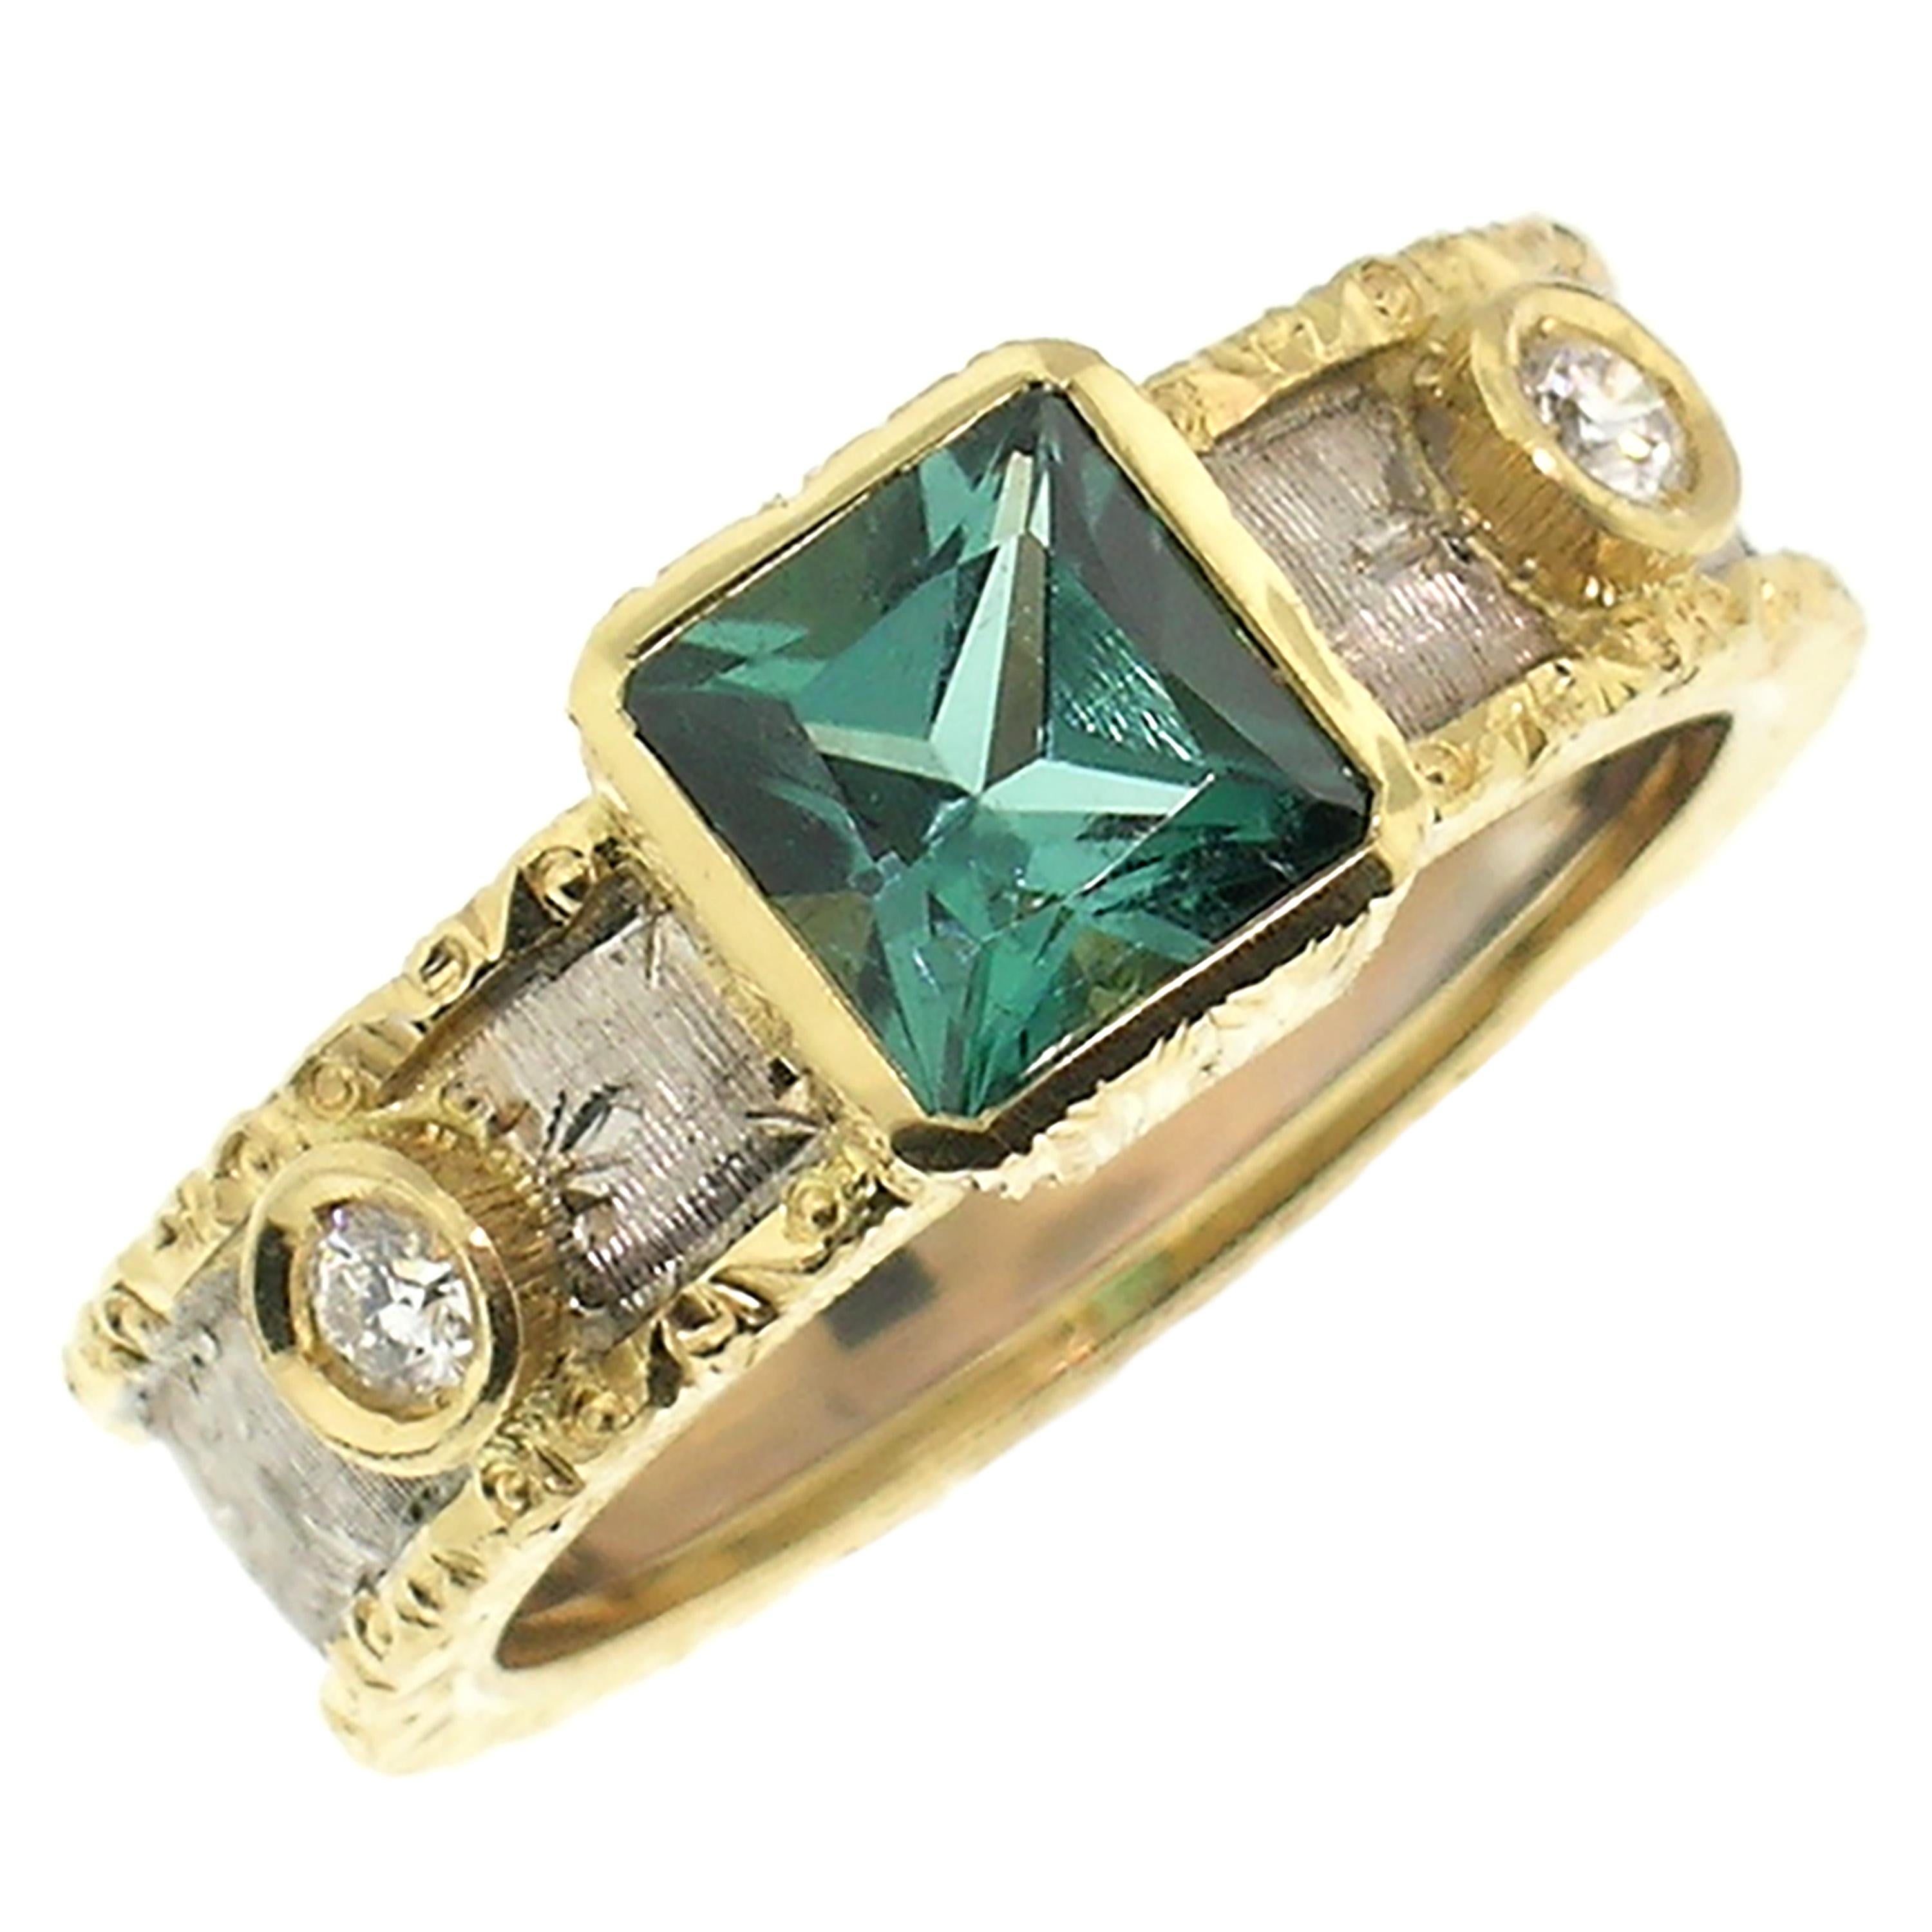 Tourmaline and Diamond 18kt Ring, Made in Italy by Cynthia Scott Jewelry